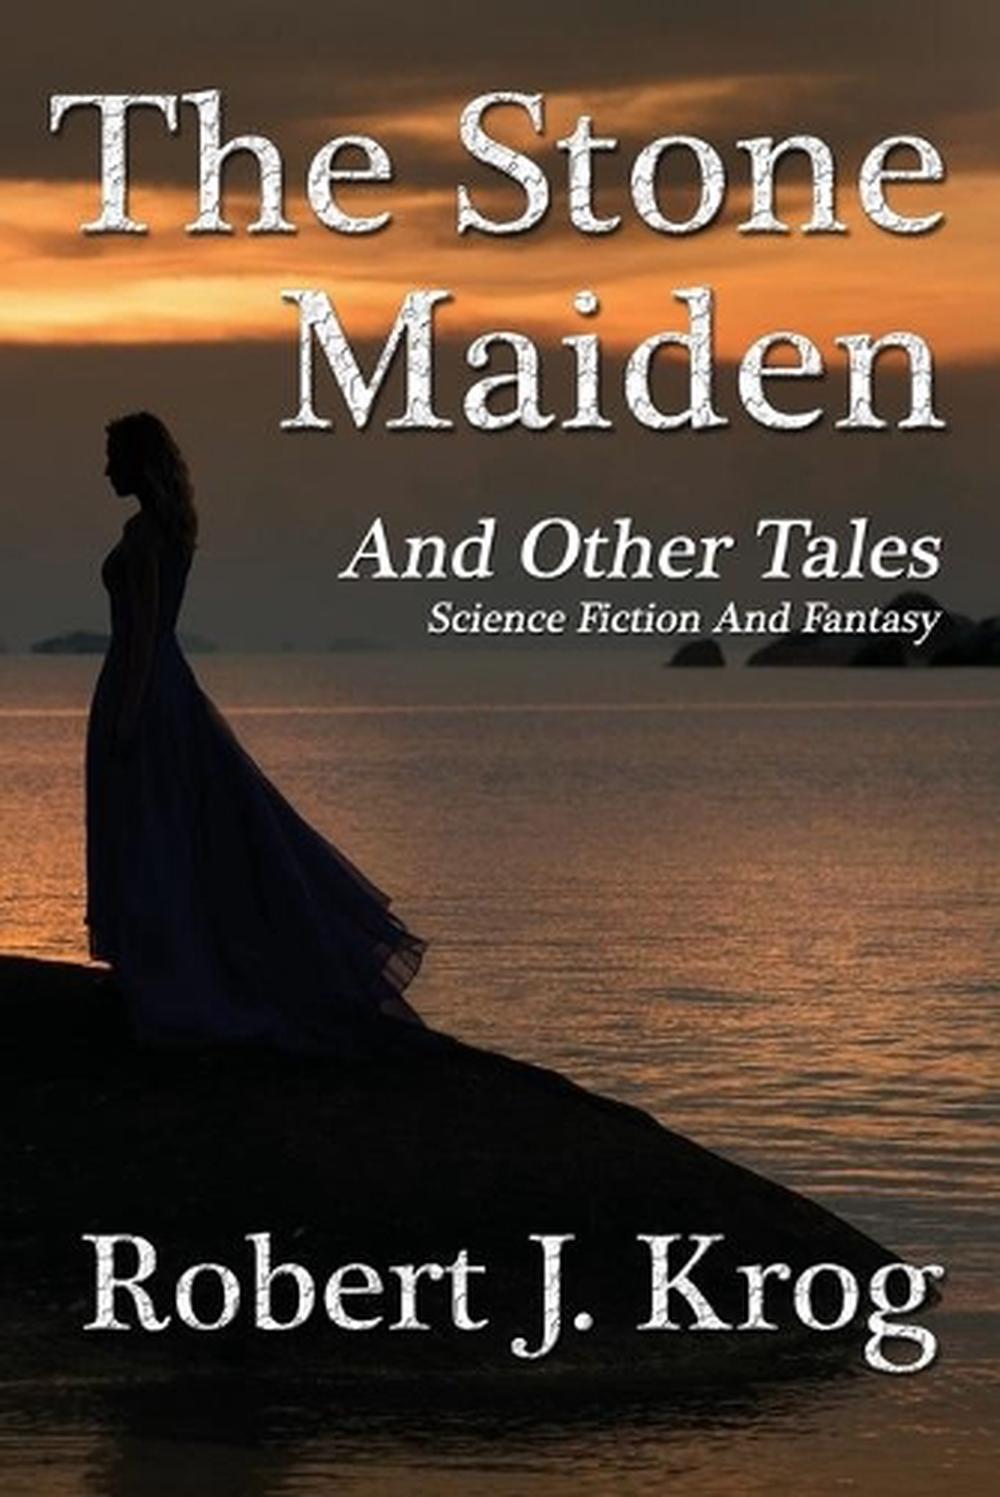 the maidens book